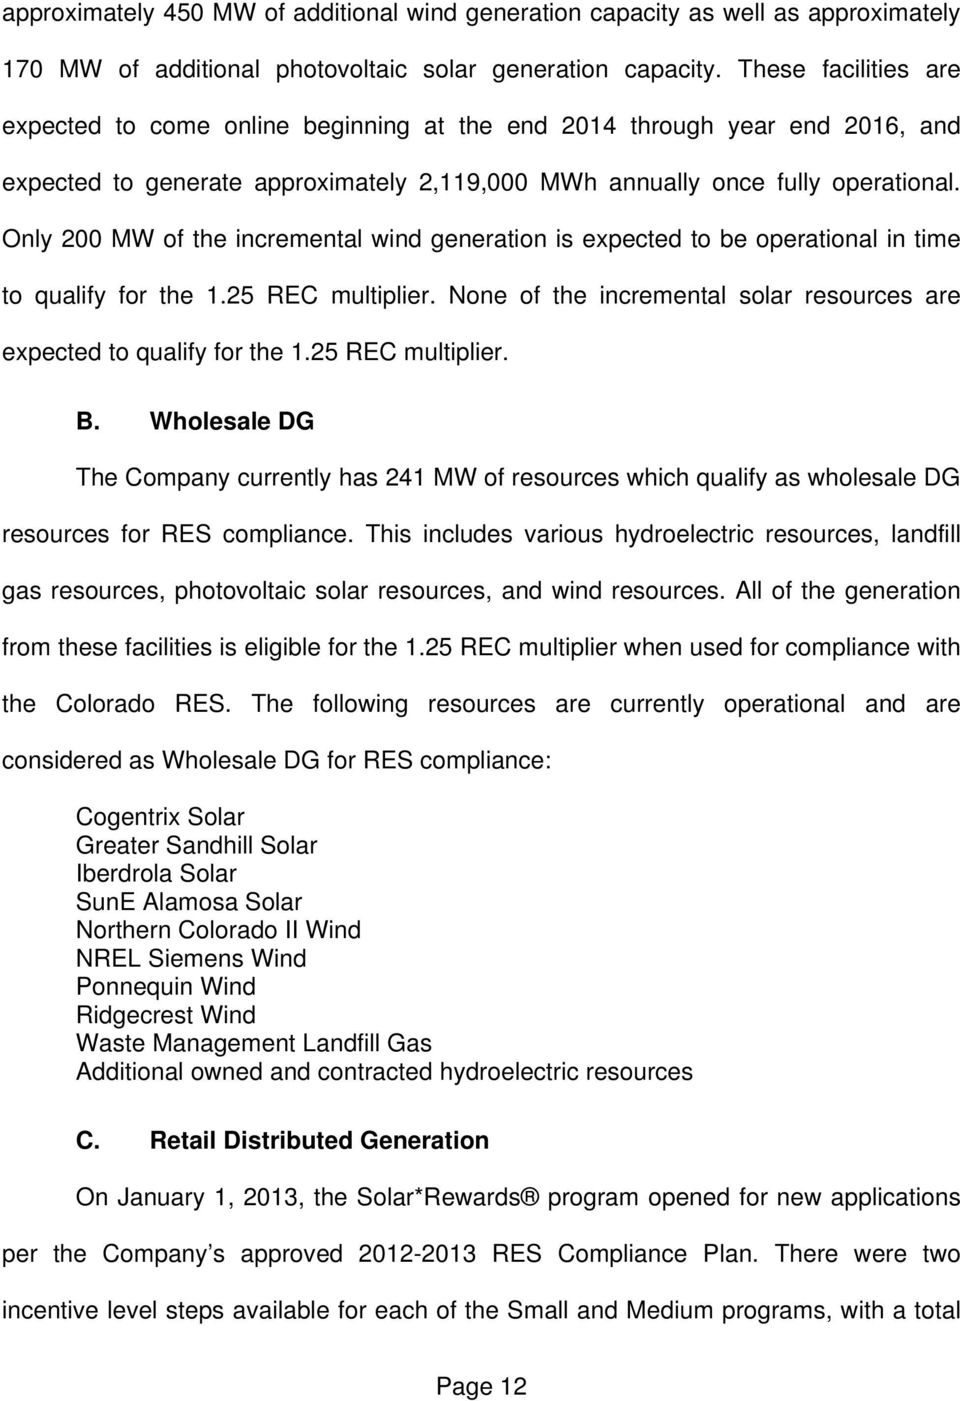 Only 200 MW of the incremental wind generation is expected to be operational in time to qualify for the 1.25 REC multiplier. None of the incremental solar resources are expected to qualify for the 1.